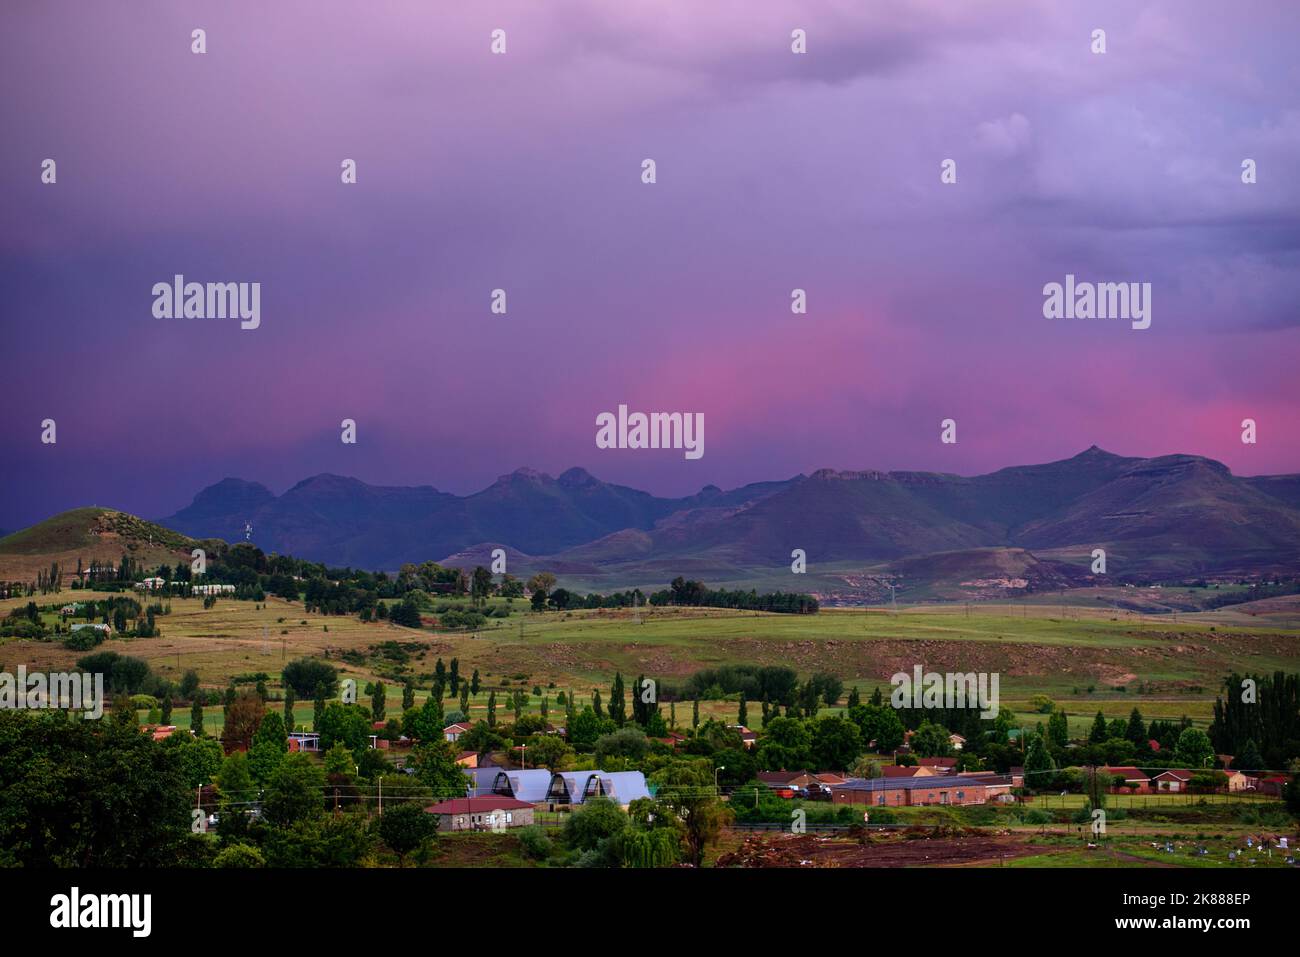 A view of the mountains under a stormy purple sky at sunset in Clarens, South Africa. The popular town is near the Golden Gate Highlands National Park Stock Photo